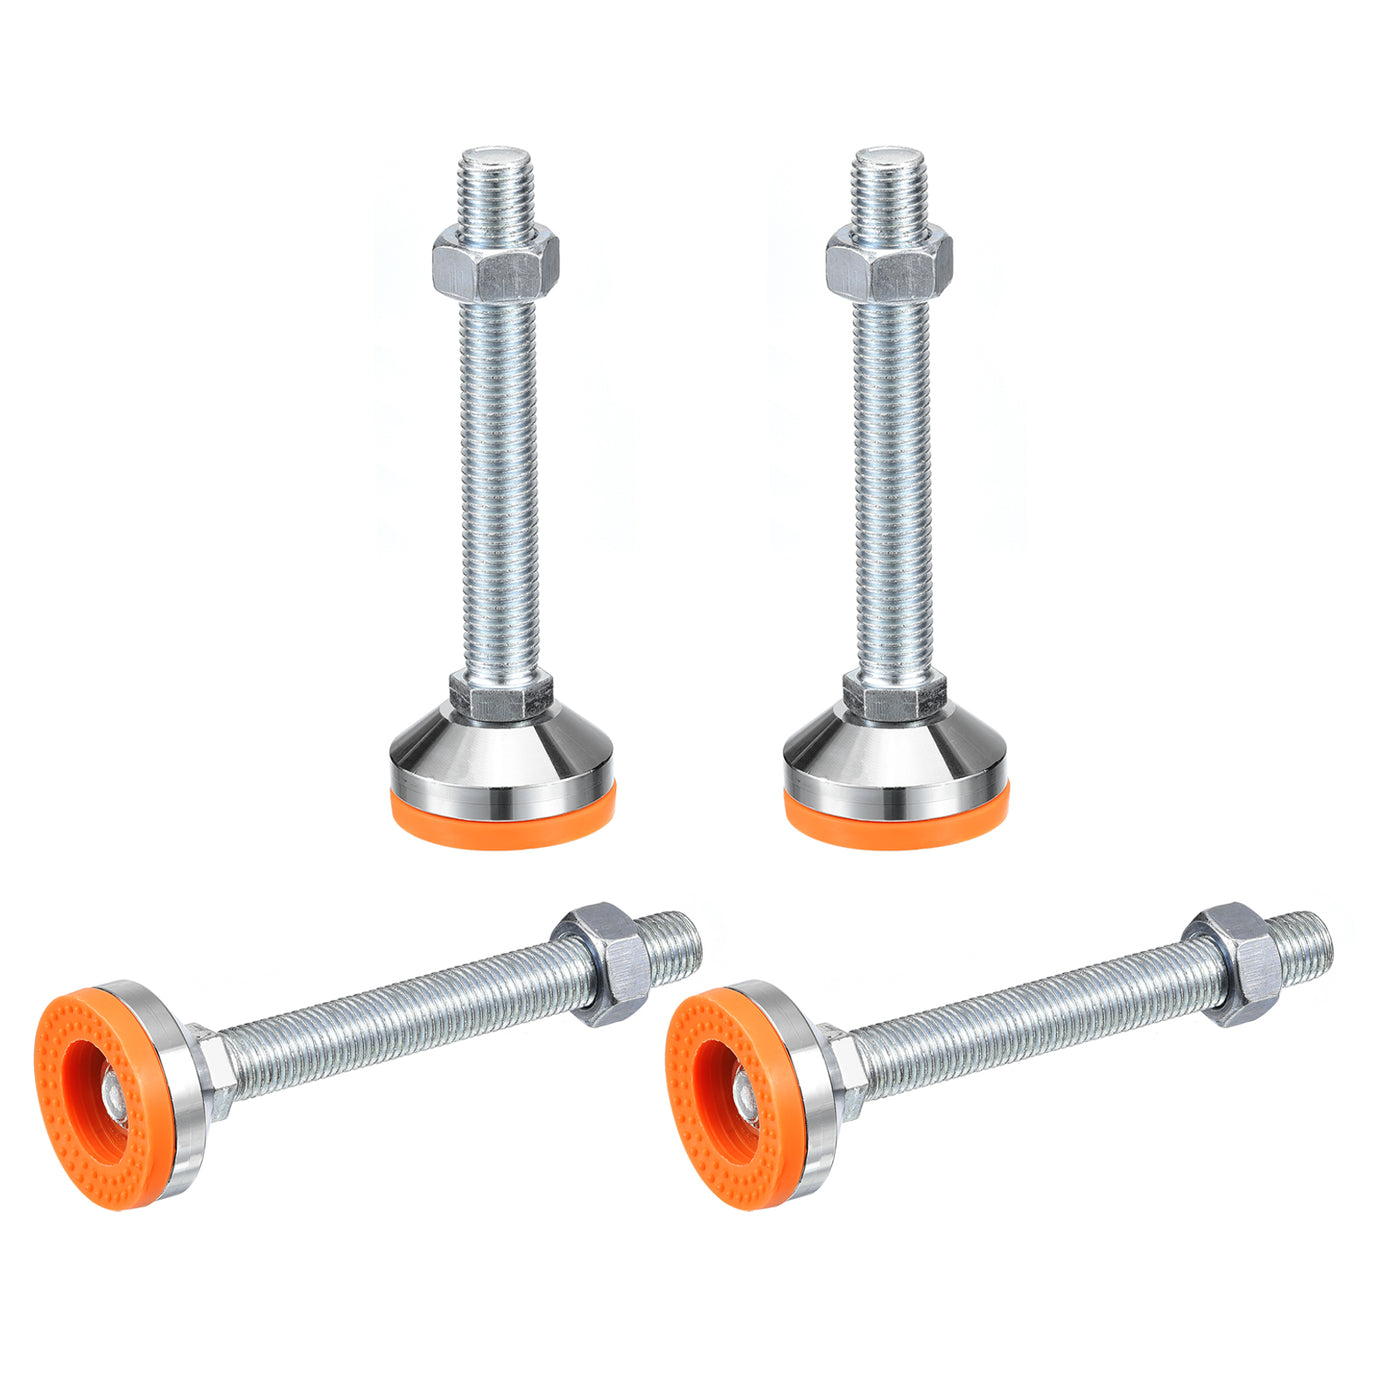 uxcell Uxcell Leveling Feet, 4Pcs M20x150x60mm - Carbon Steel Non-Skid Anti-shock Adjustable Table Feet, Leveling Screw Leg for Furniture Workshops Equipment